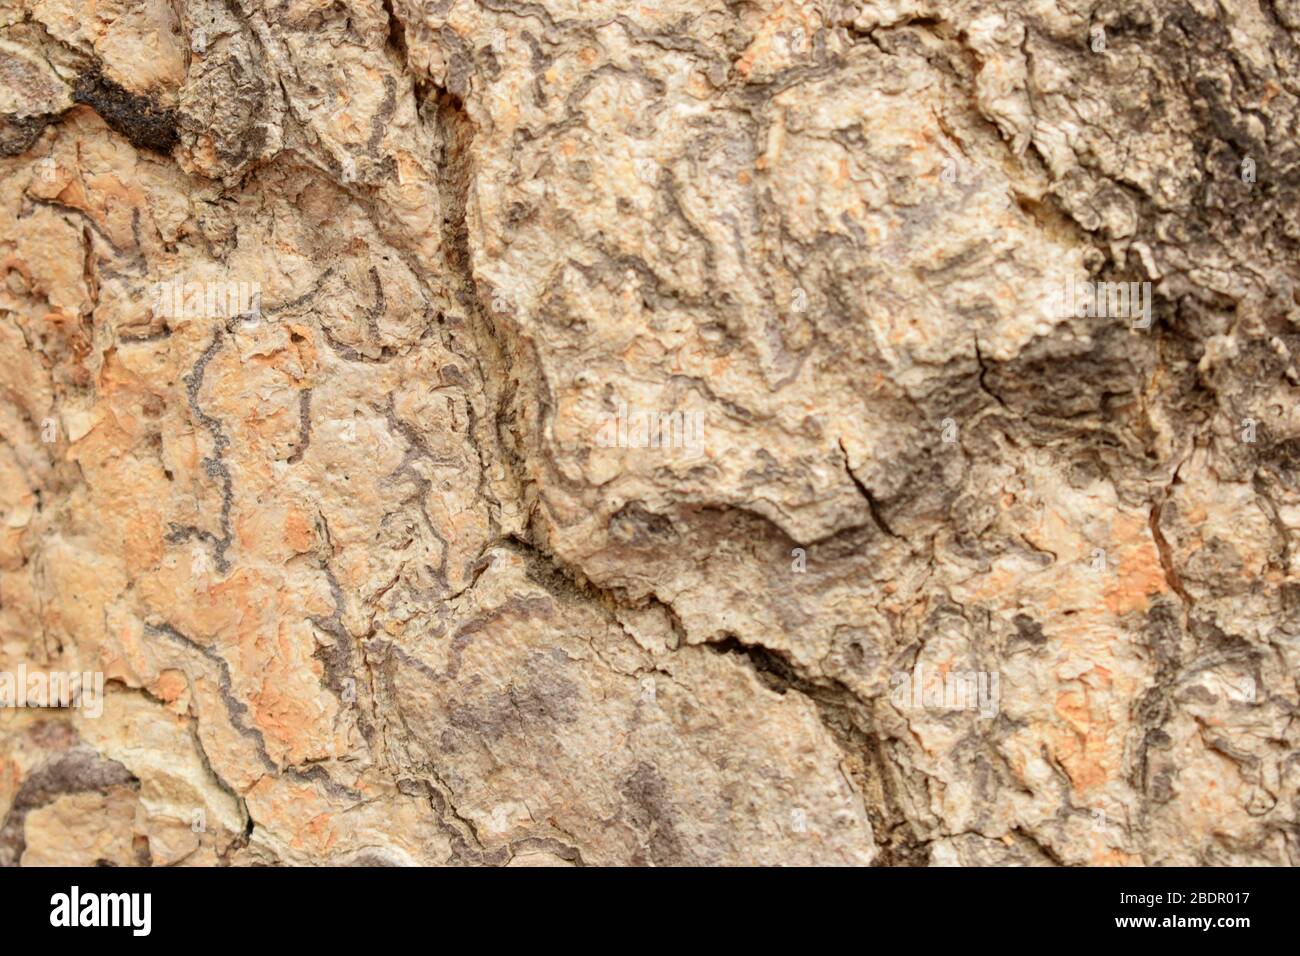 Dry Tree Branch Textured Close-up background Macro Stock Photography Image Stock Photo